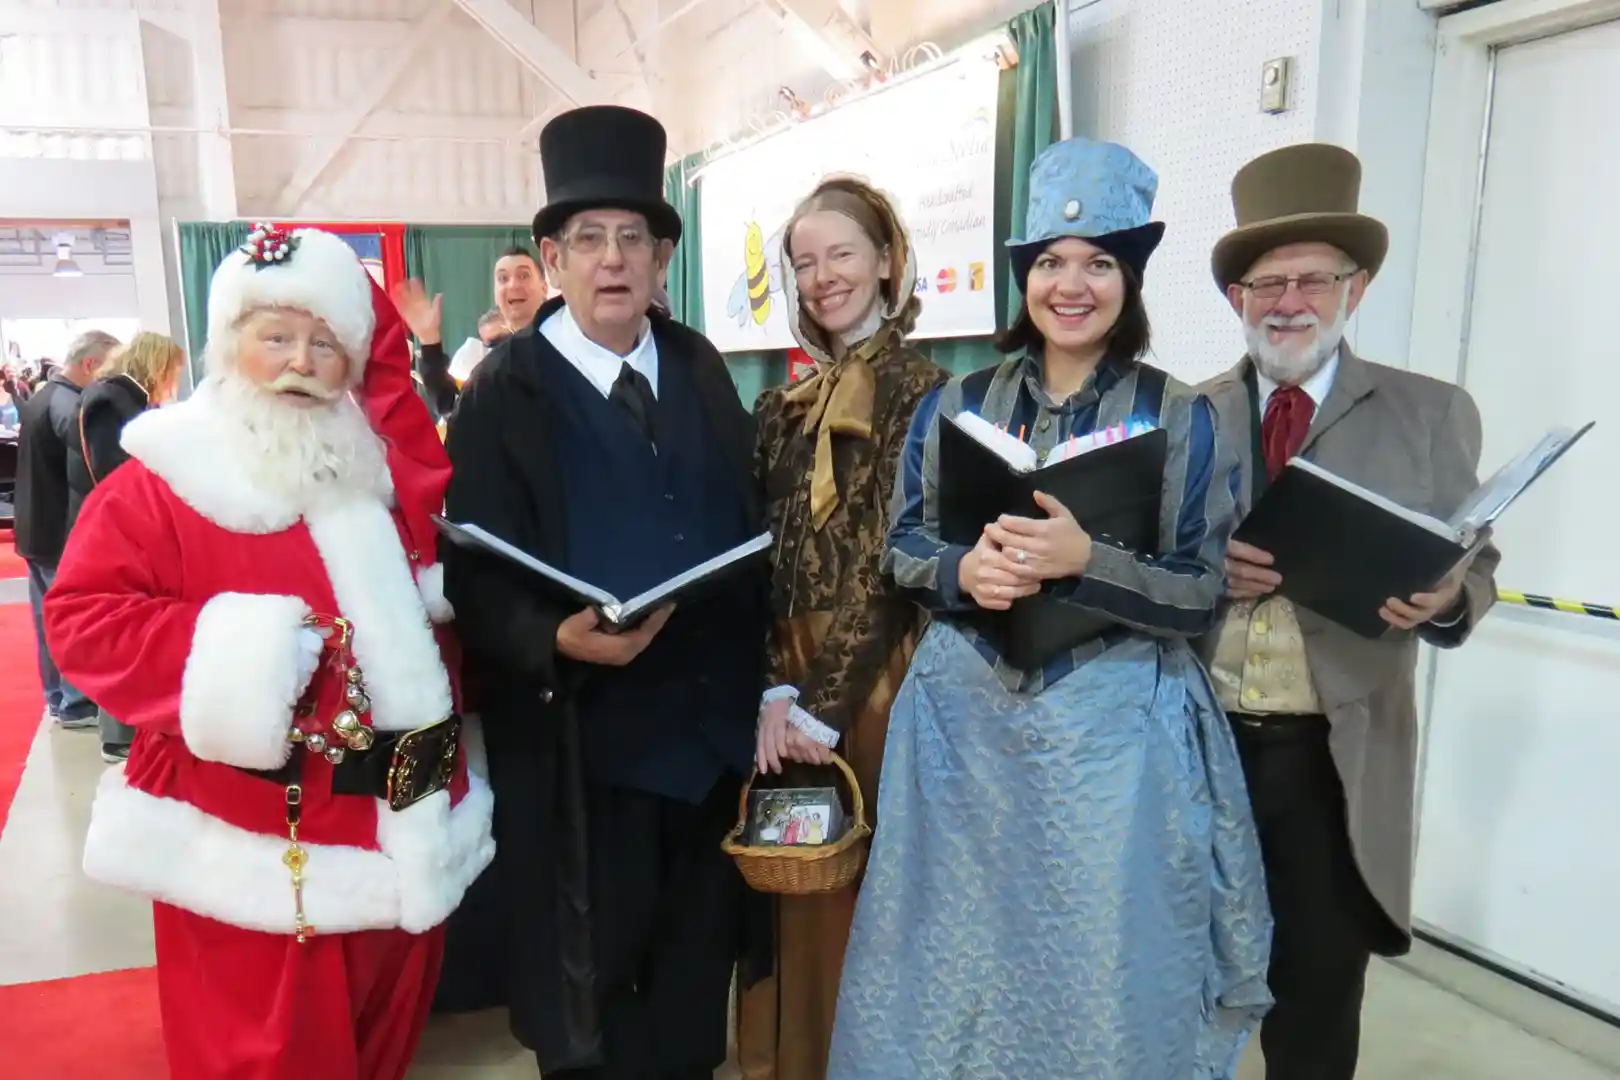 The Baker Street Victorian Carollers at Markham Home for the Holidays